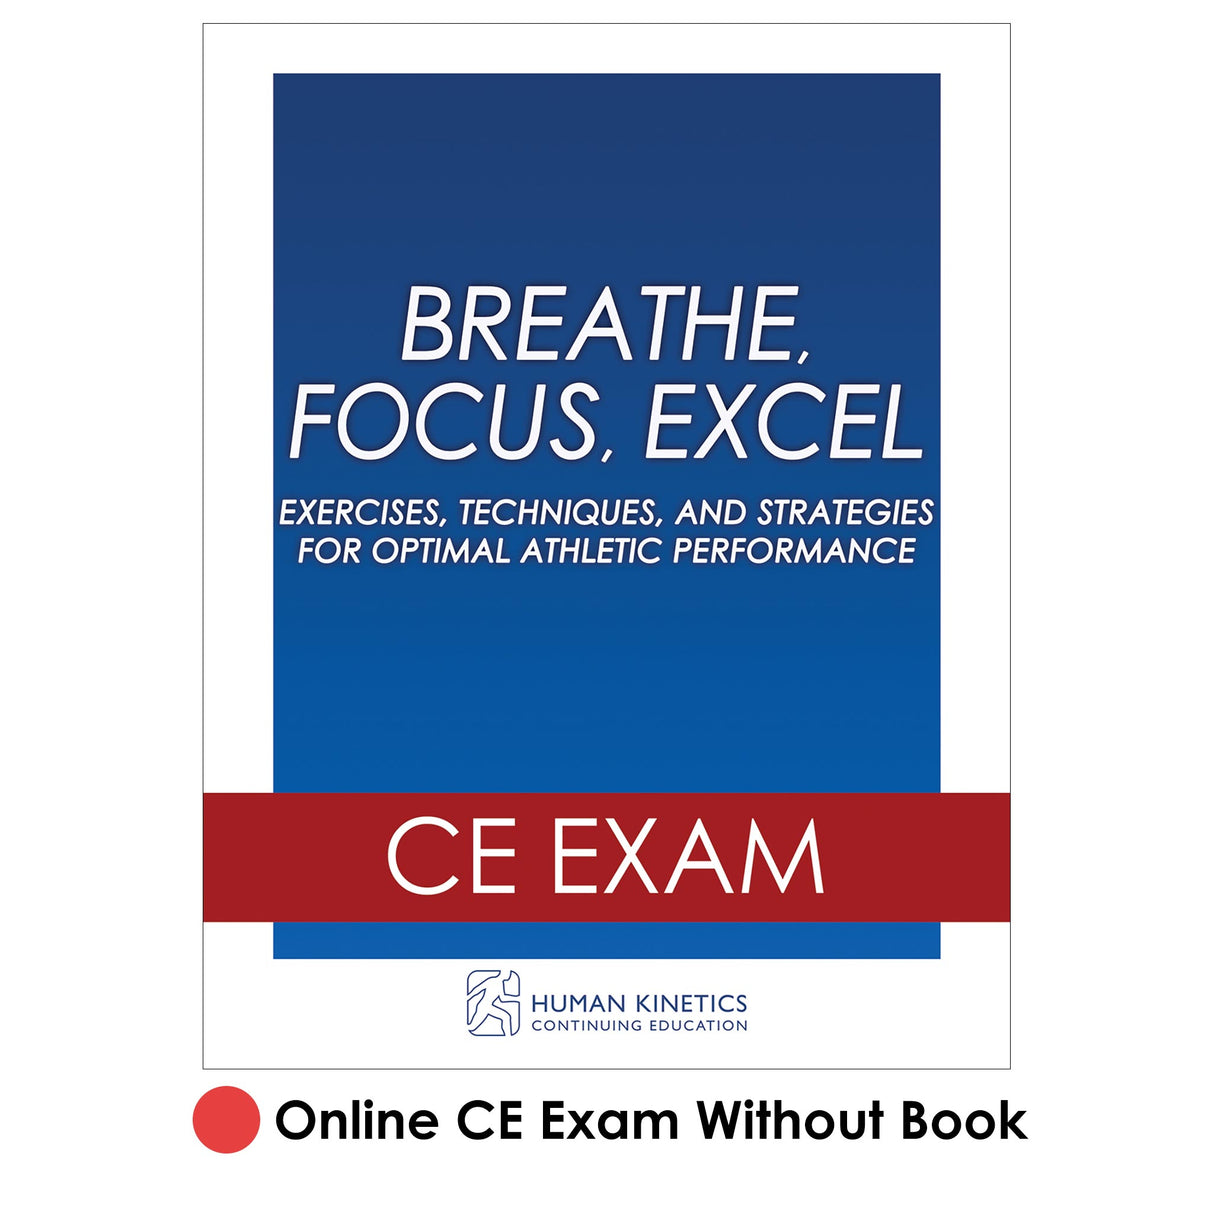 Breathe, Focus, Excel Online CE Exam Without Book